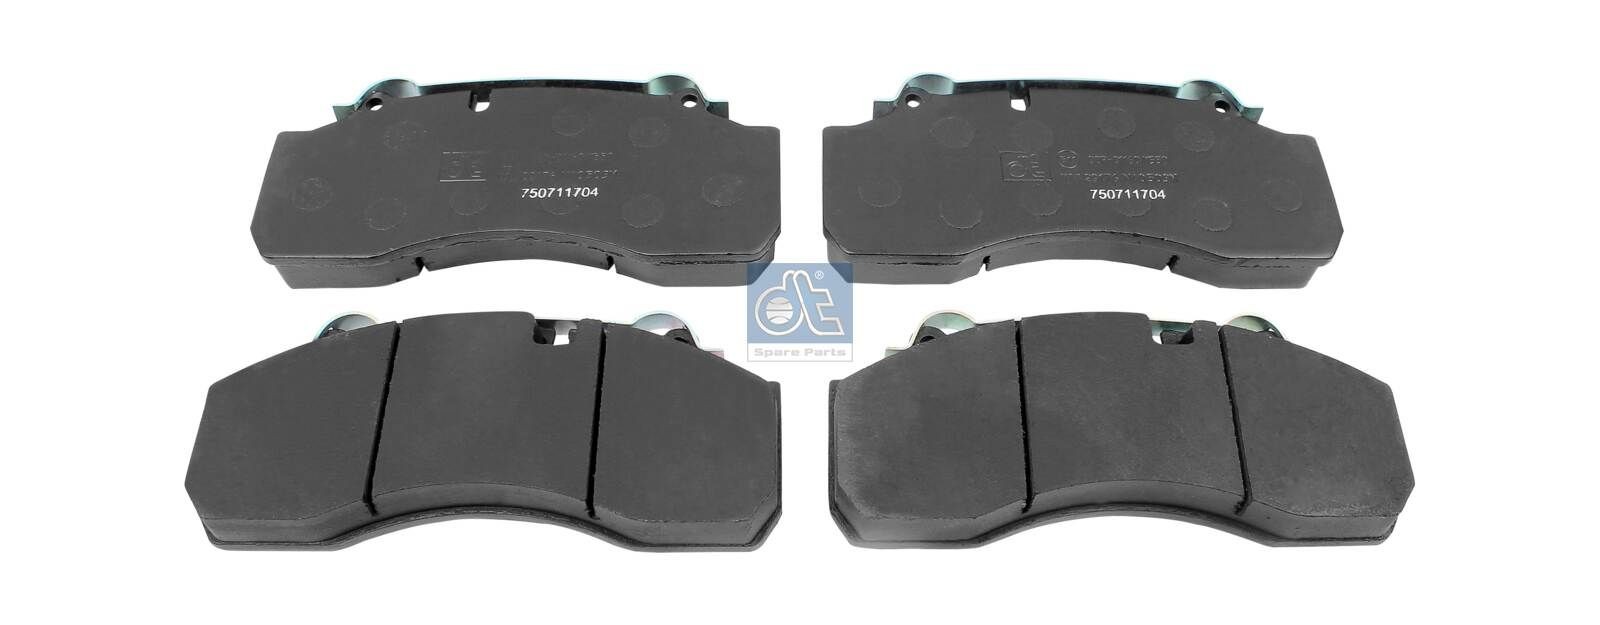 29176 DT Spare Parts Rear Axle Height: 105mm, Width: 247,6mm, Thickness: 30mm Brake pads 10.34125 buy